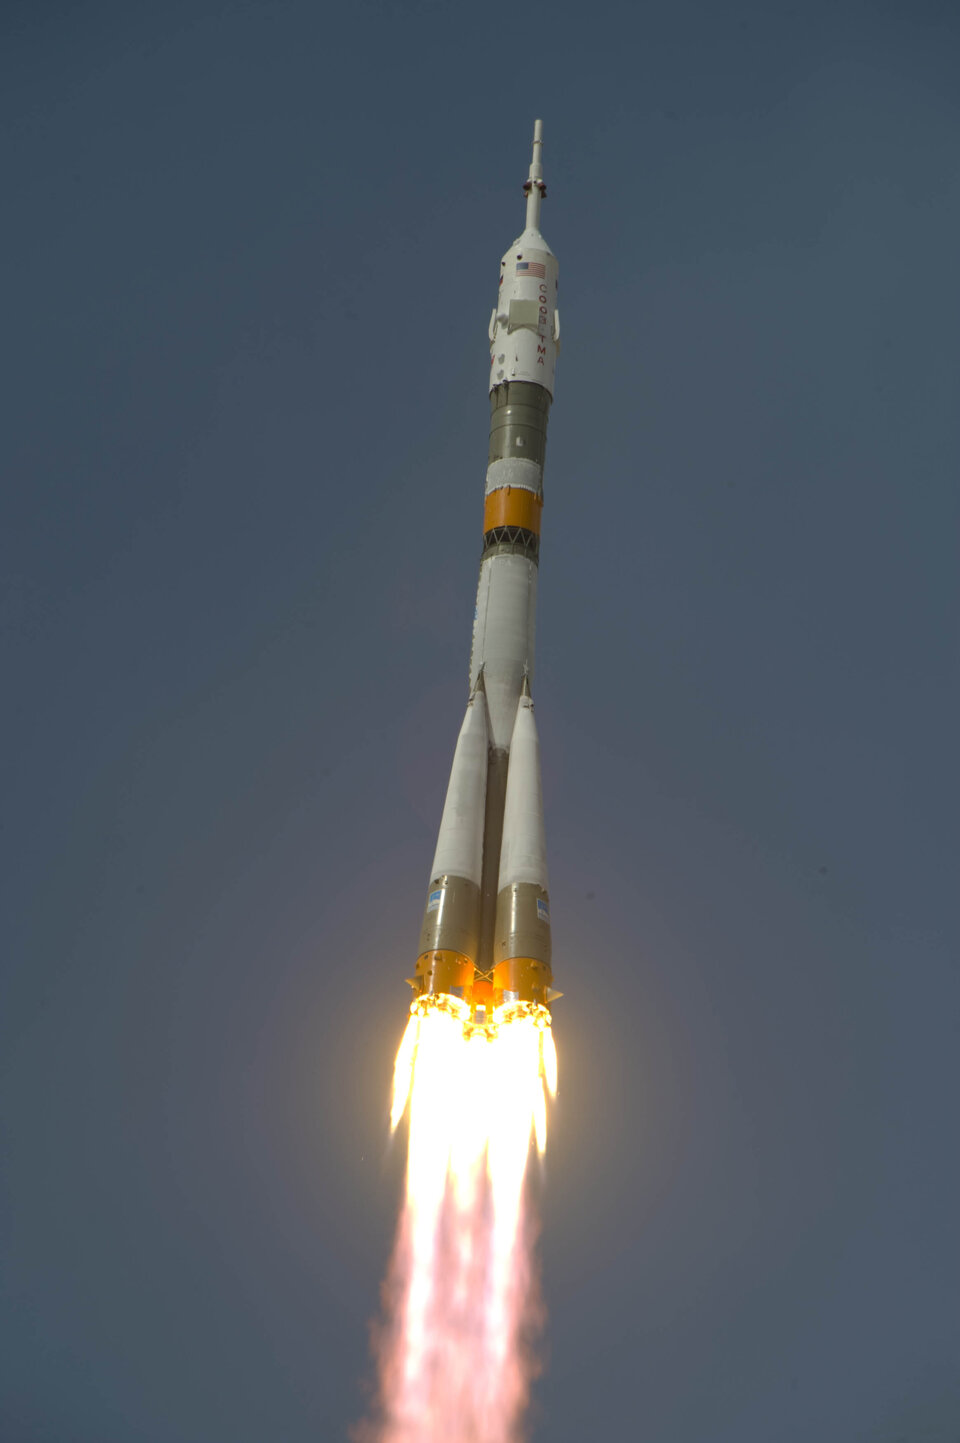 The Soyuz TMA-15 spacecraft was launched from Baikonur Cosmodrome on 27 May